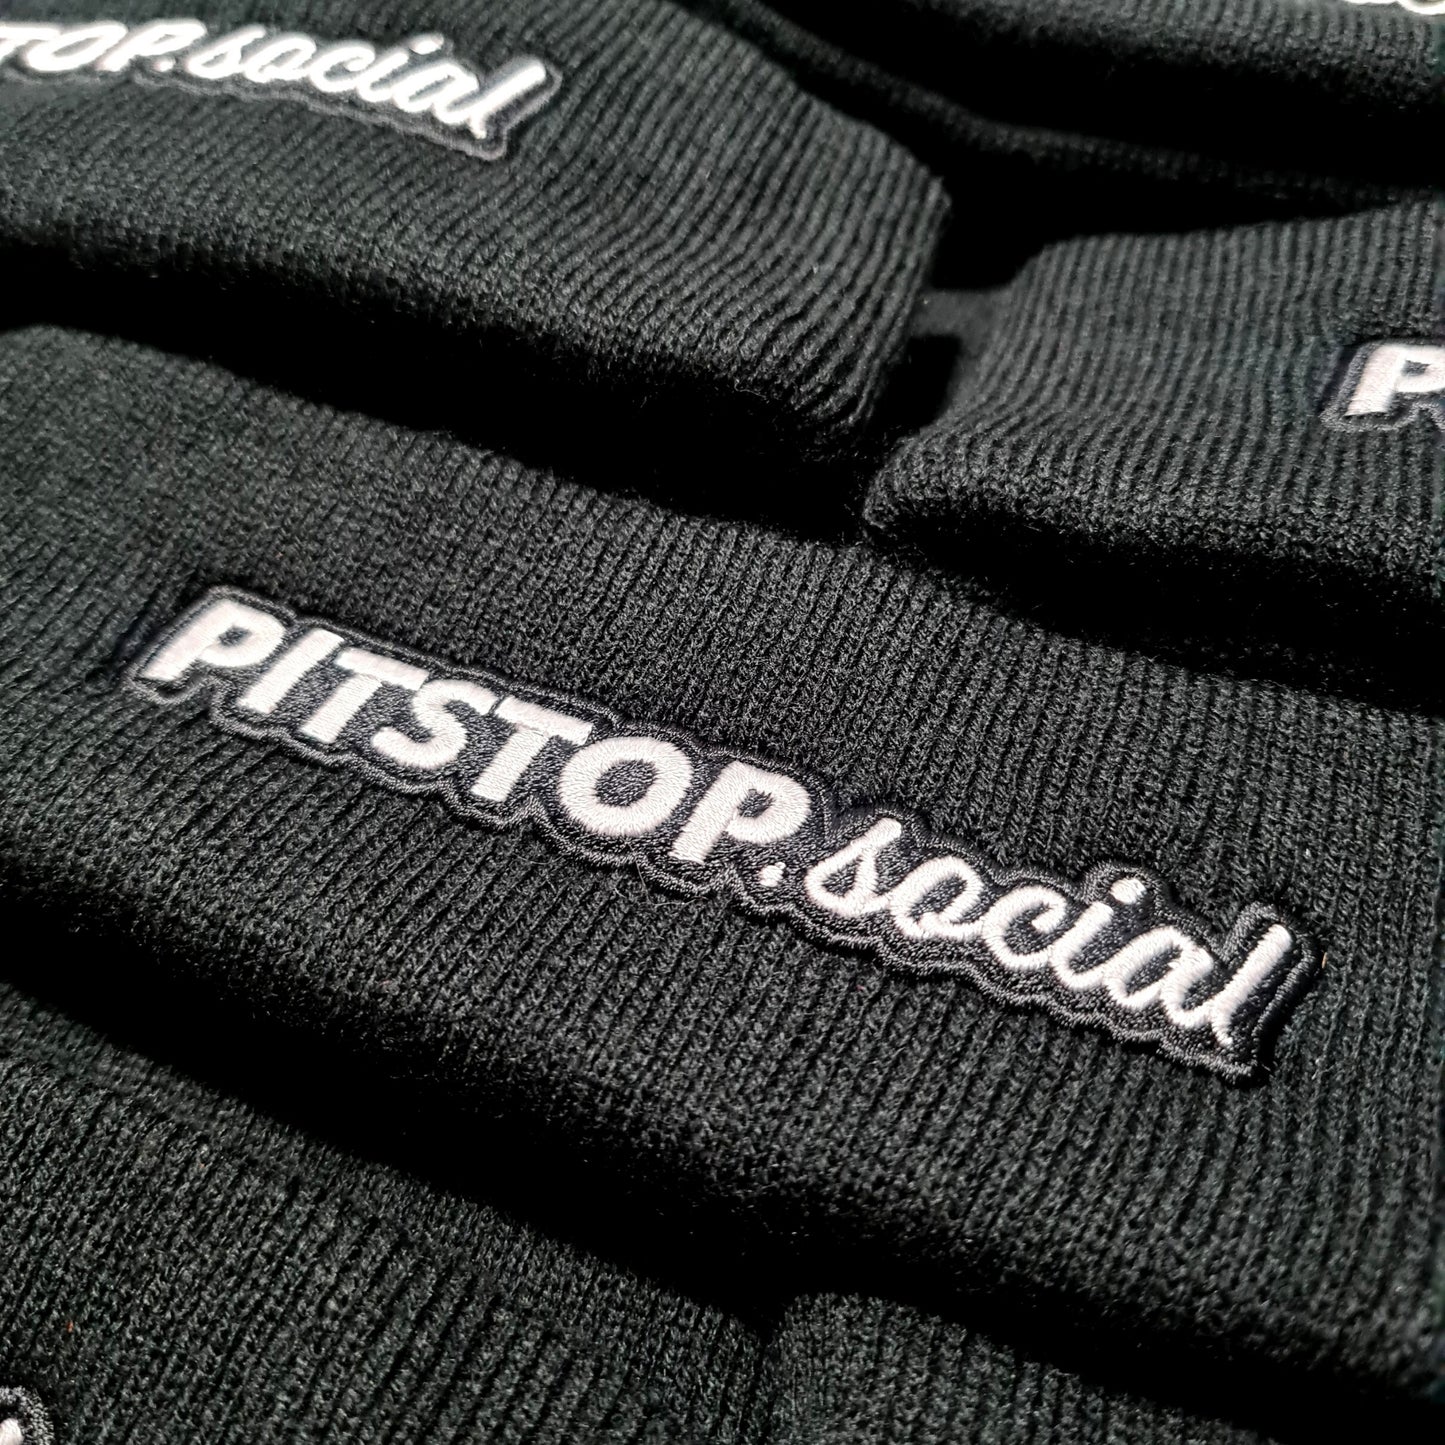 Pitstop Social Embroidered Logo Beanie Bobble Hat